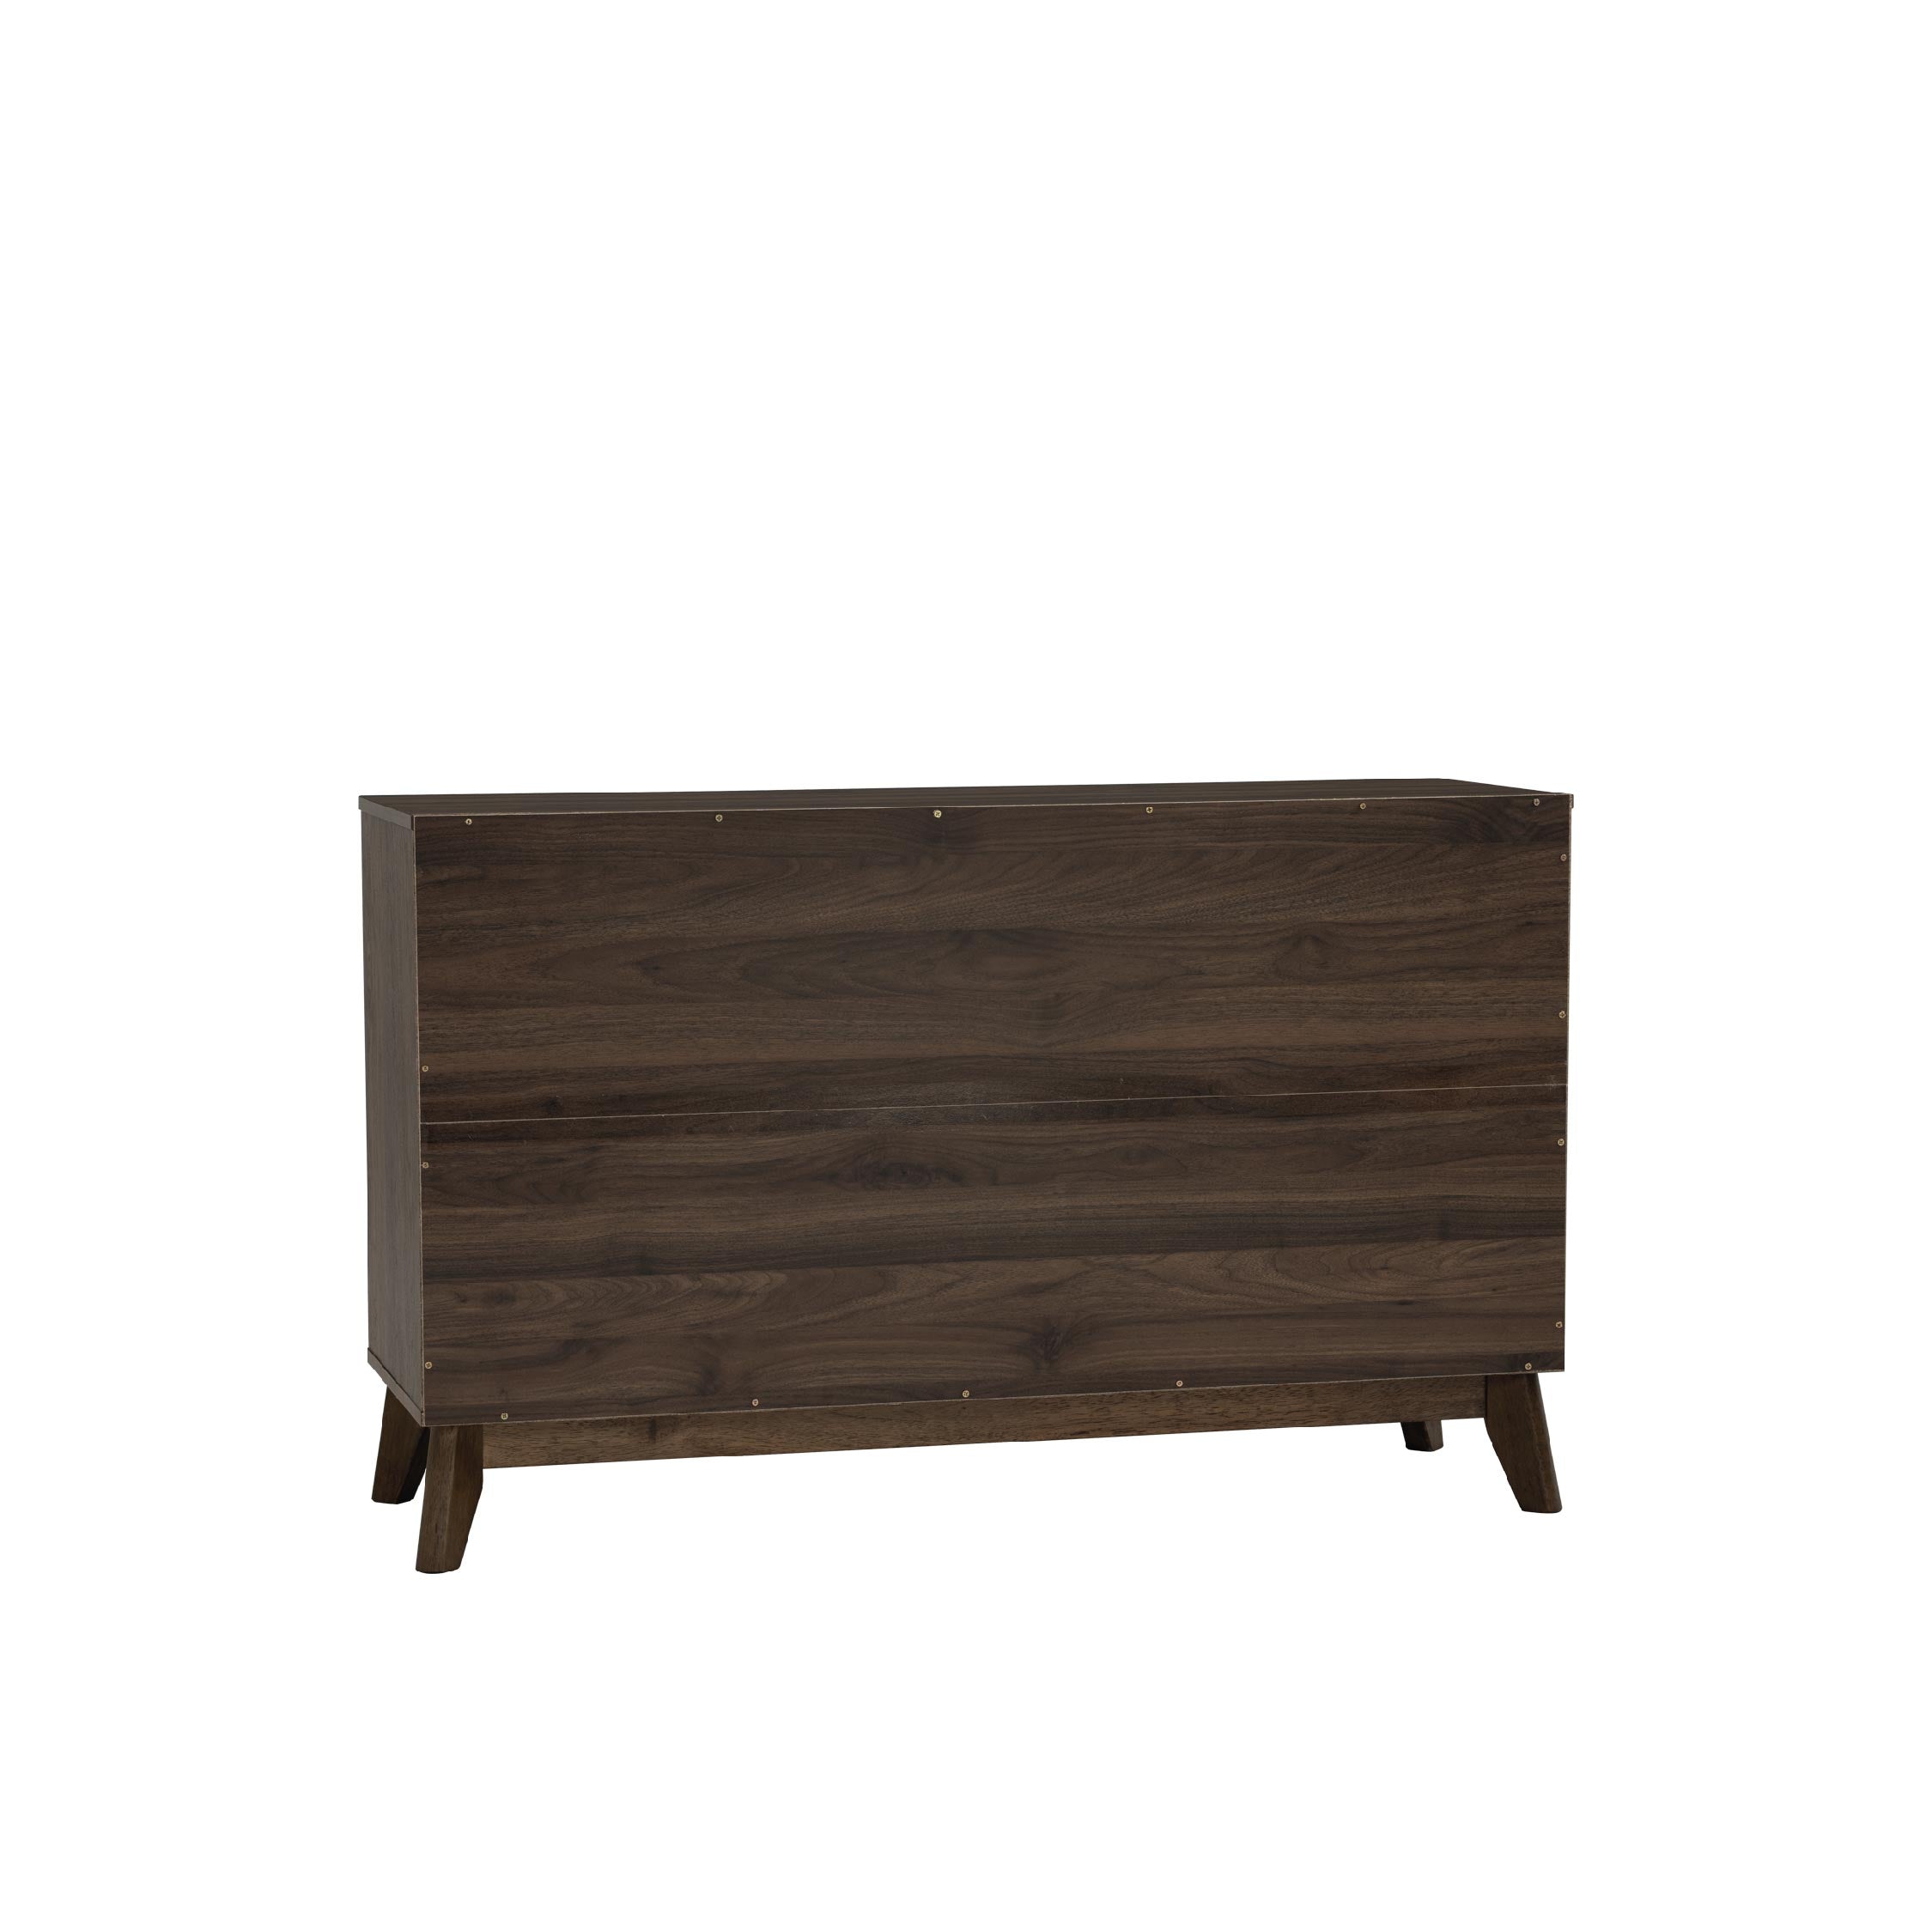 NORDI Chest of Drawers 1.2m